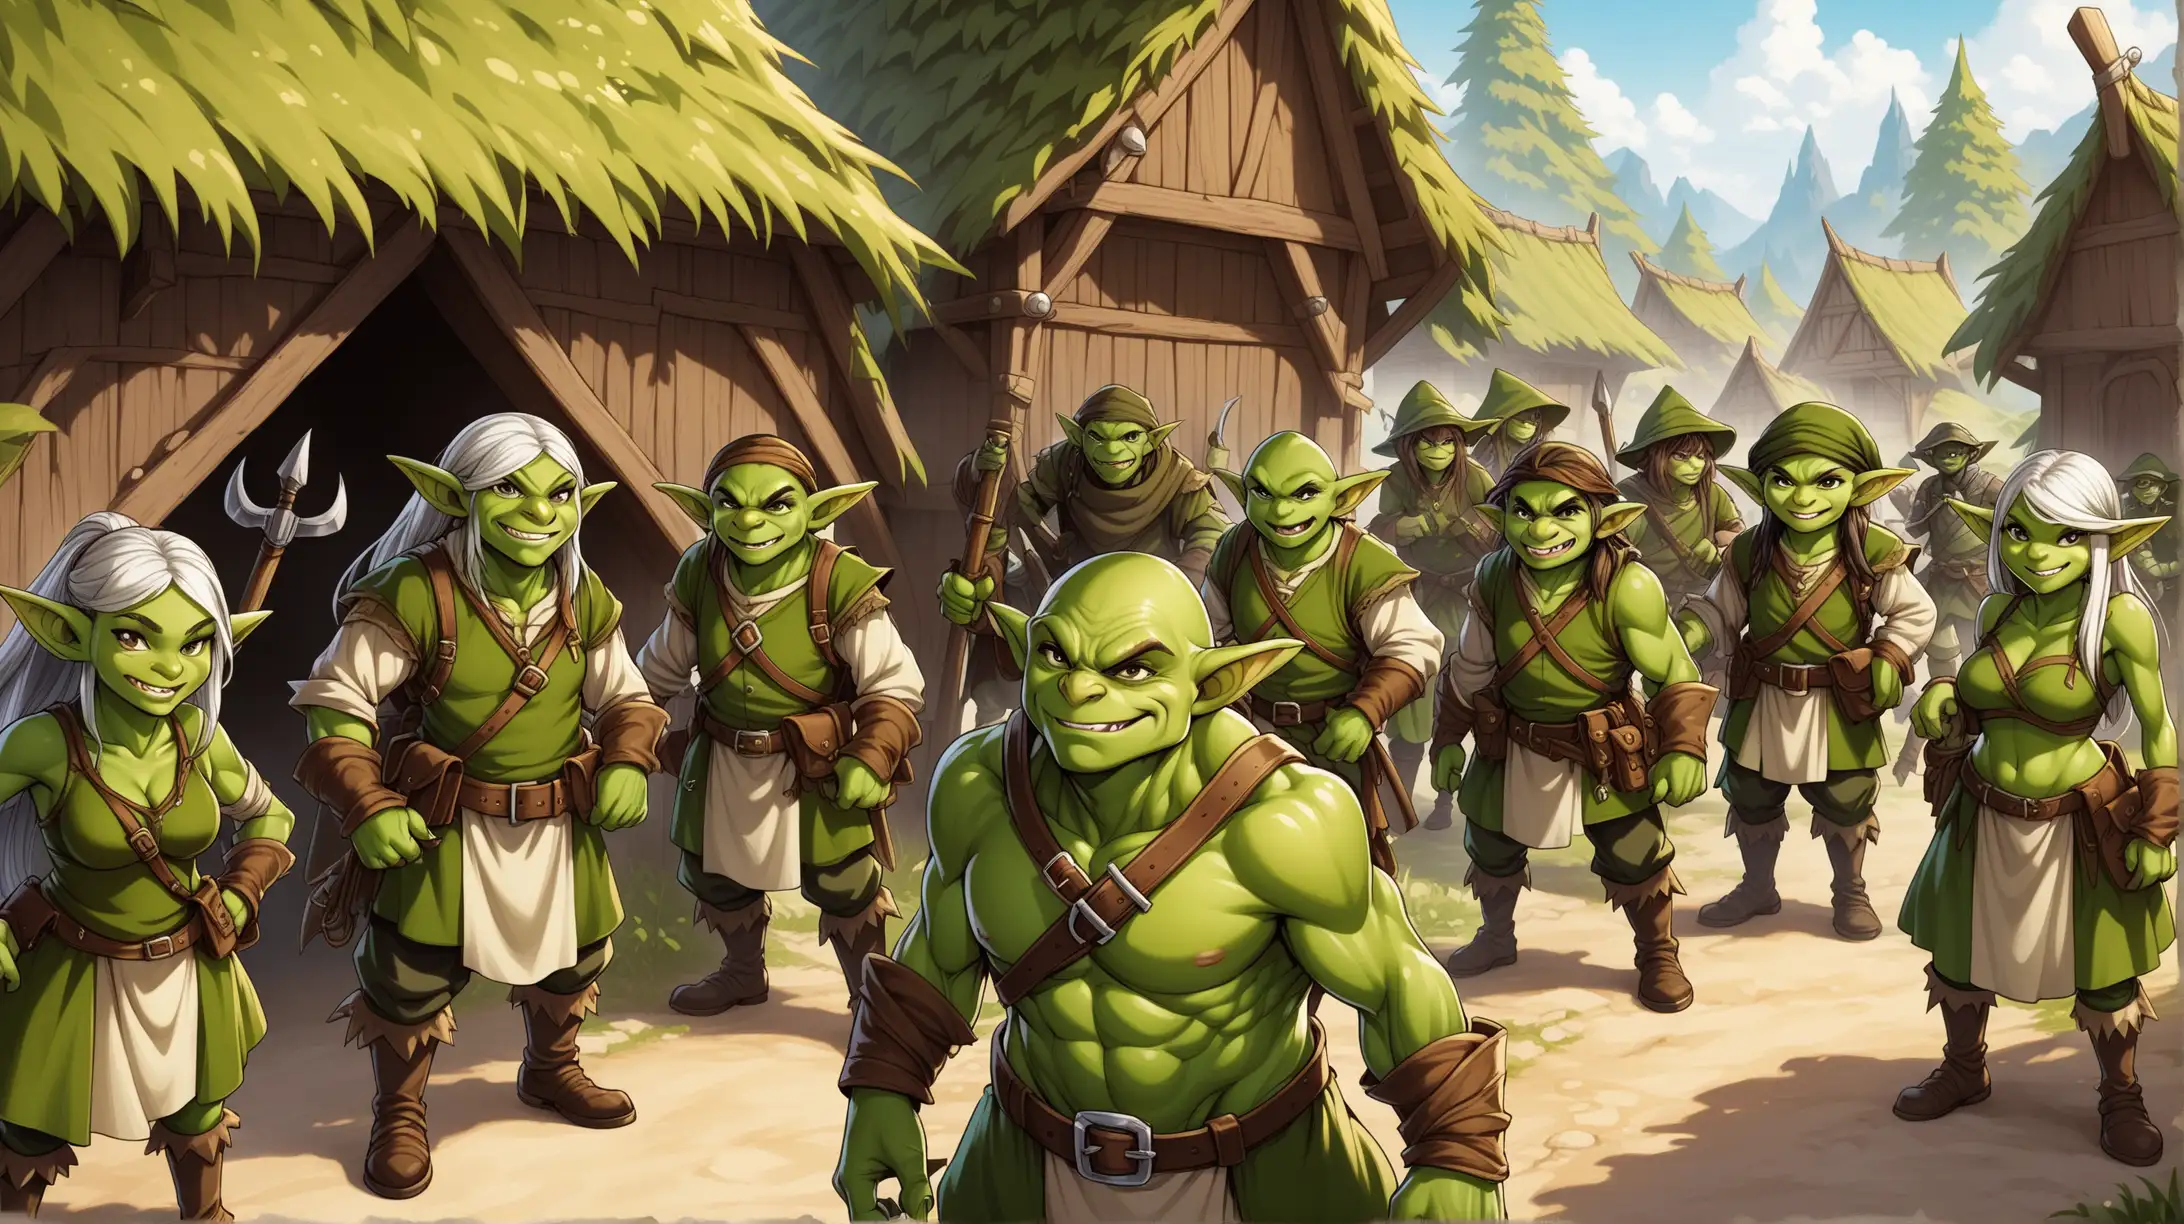 Medieval Fantasy Tribe of Olive Green Goblin Rogues and Rangers in Their Village